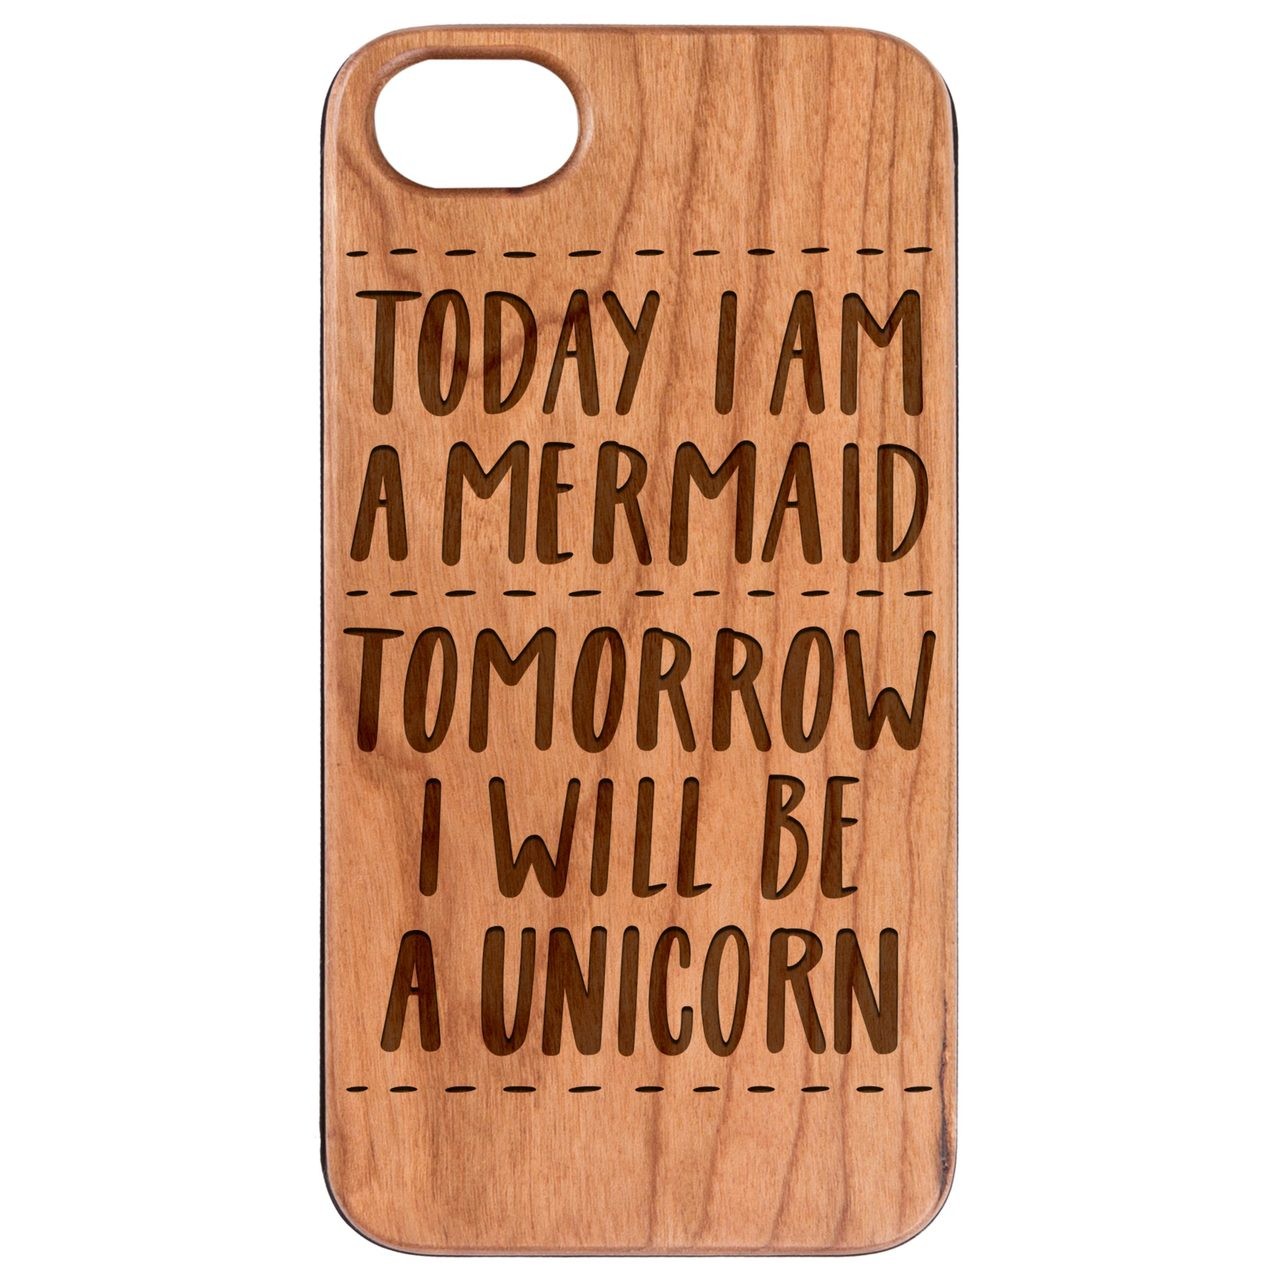  Today Mermaid Tomorrow Unicorn - Engraved - Wooden Phone Case - IPhone 13 Models